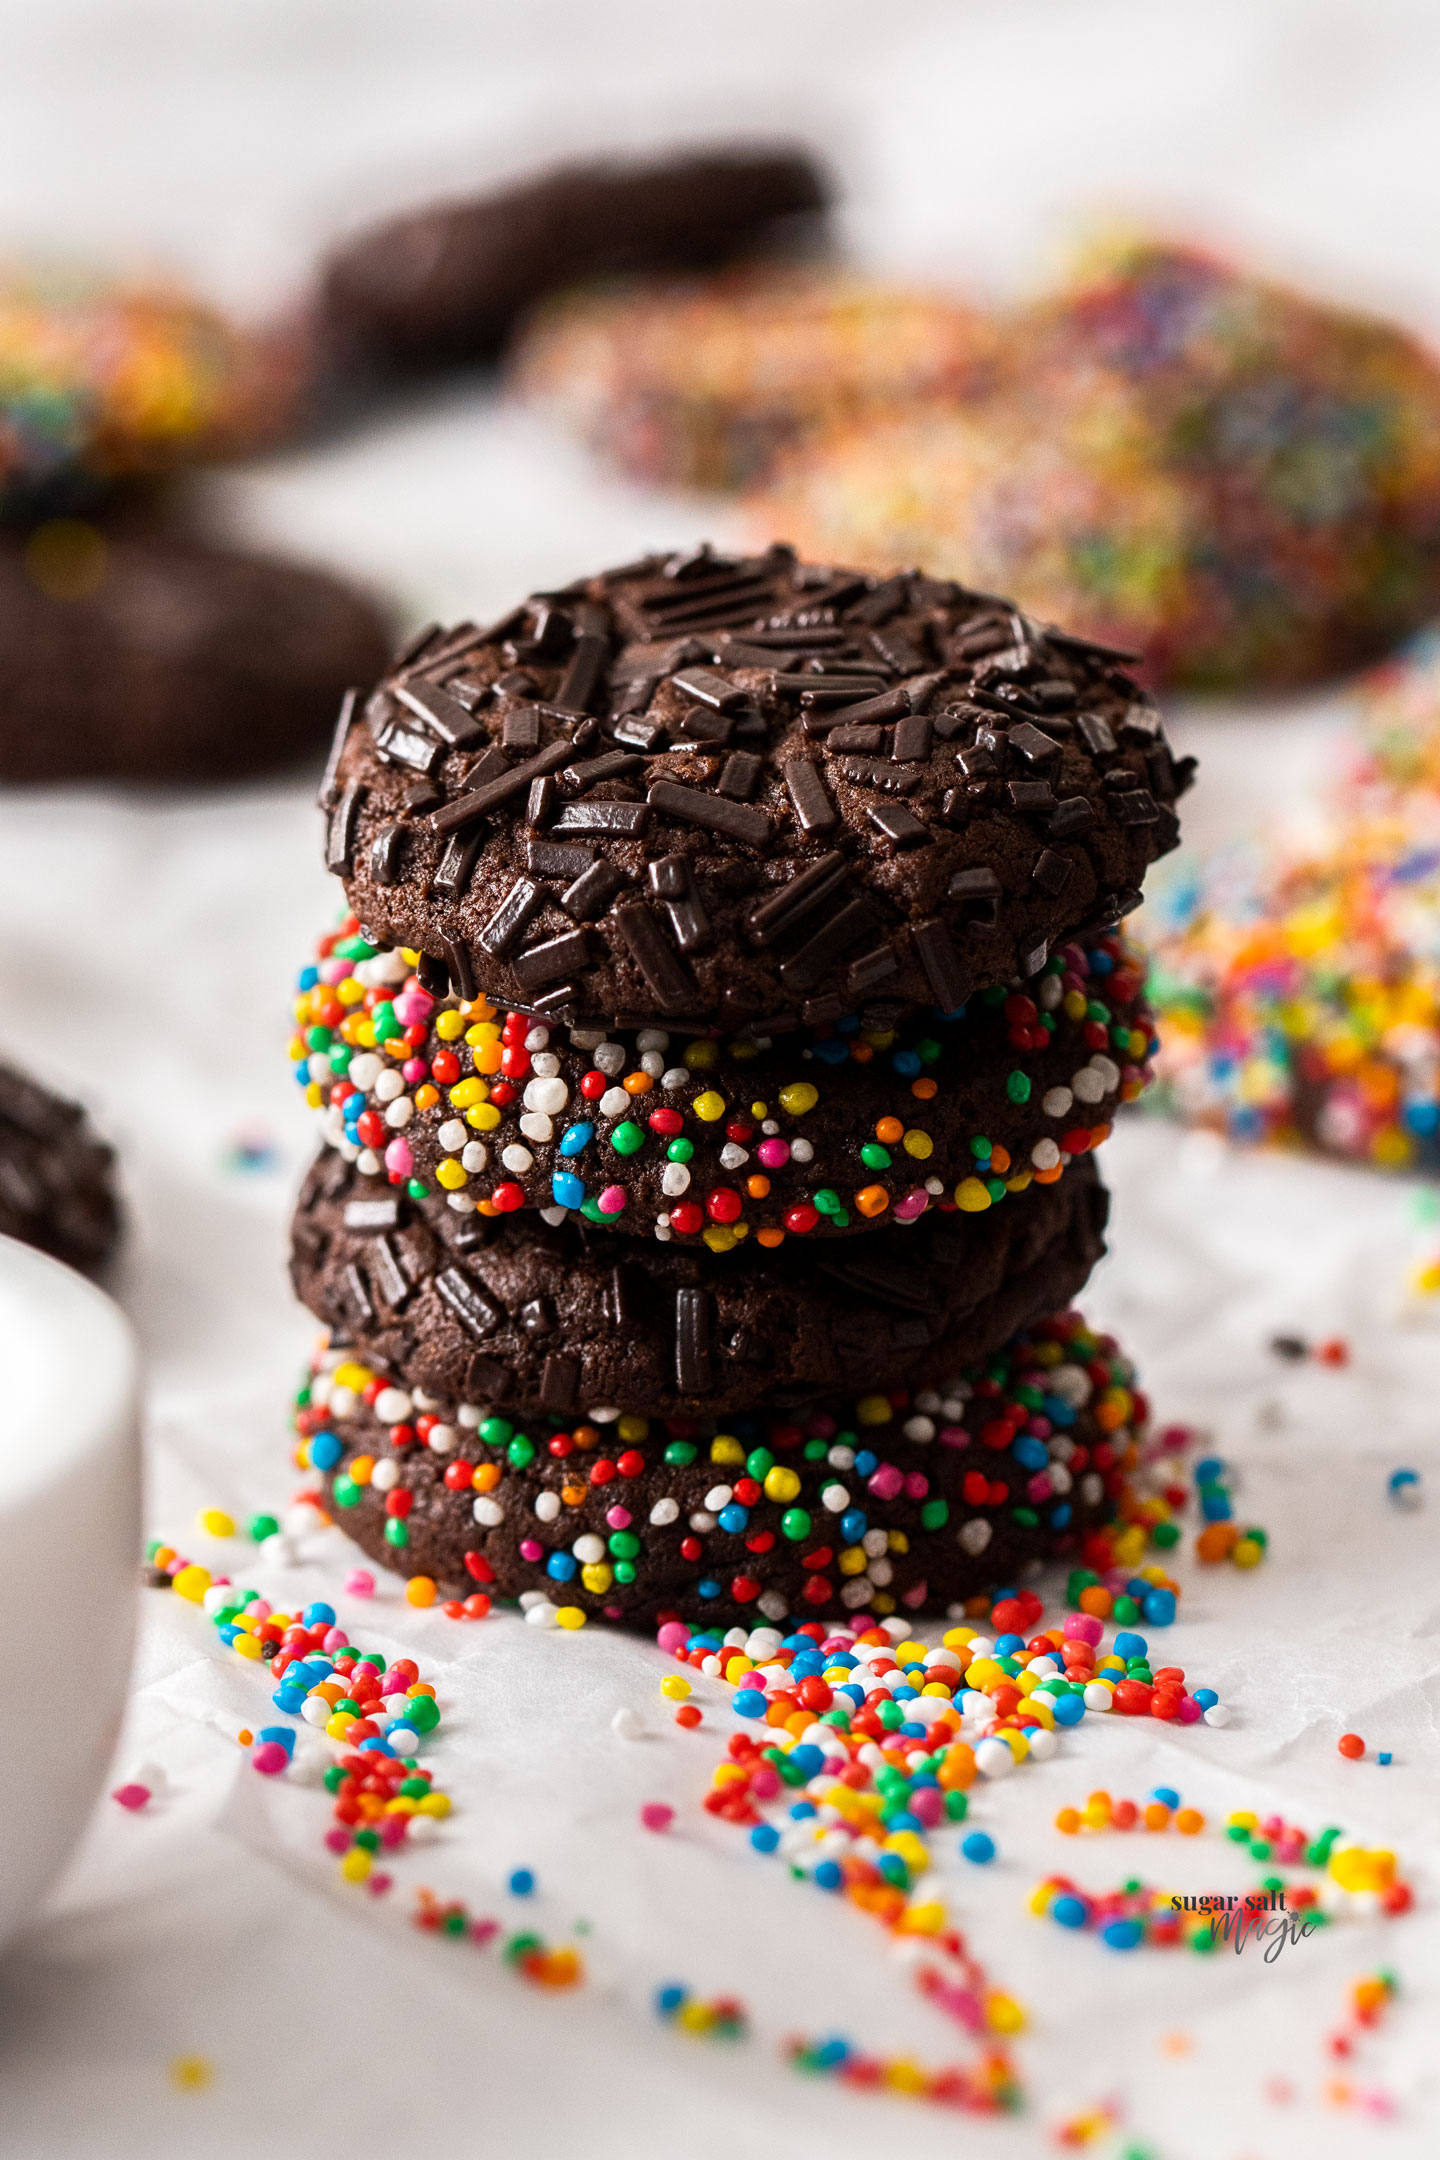 A stack of 4 chocolate sprinkle cookies.